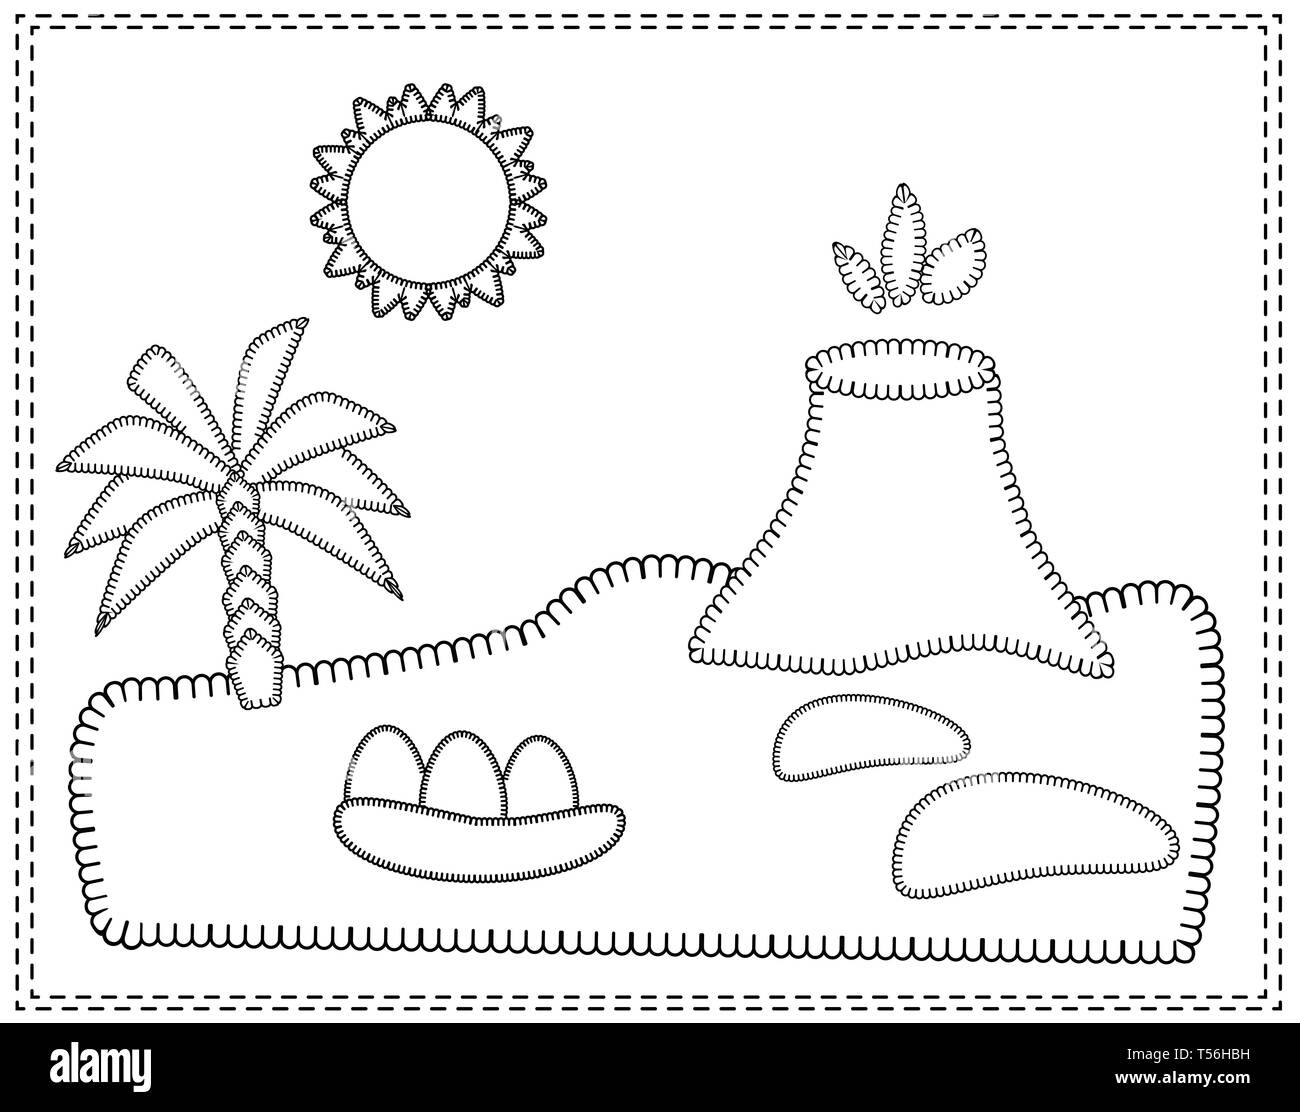 Landscape with the island of dinosaurs. Volcano, palm trees, sand, stones, sun, dinosaur eggs. Vector illustration in stitch style. For educational ga Stock Vector